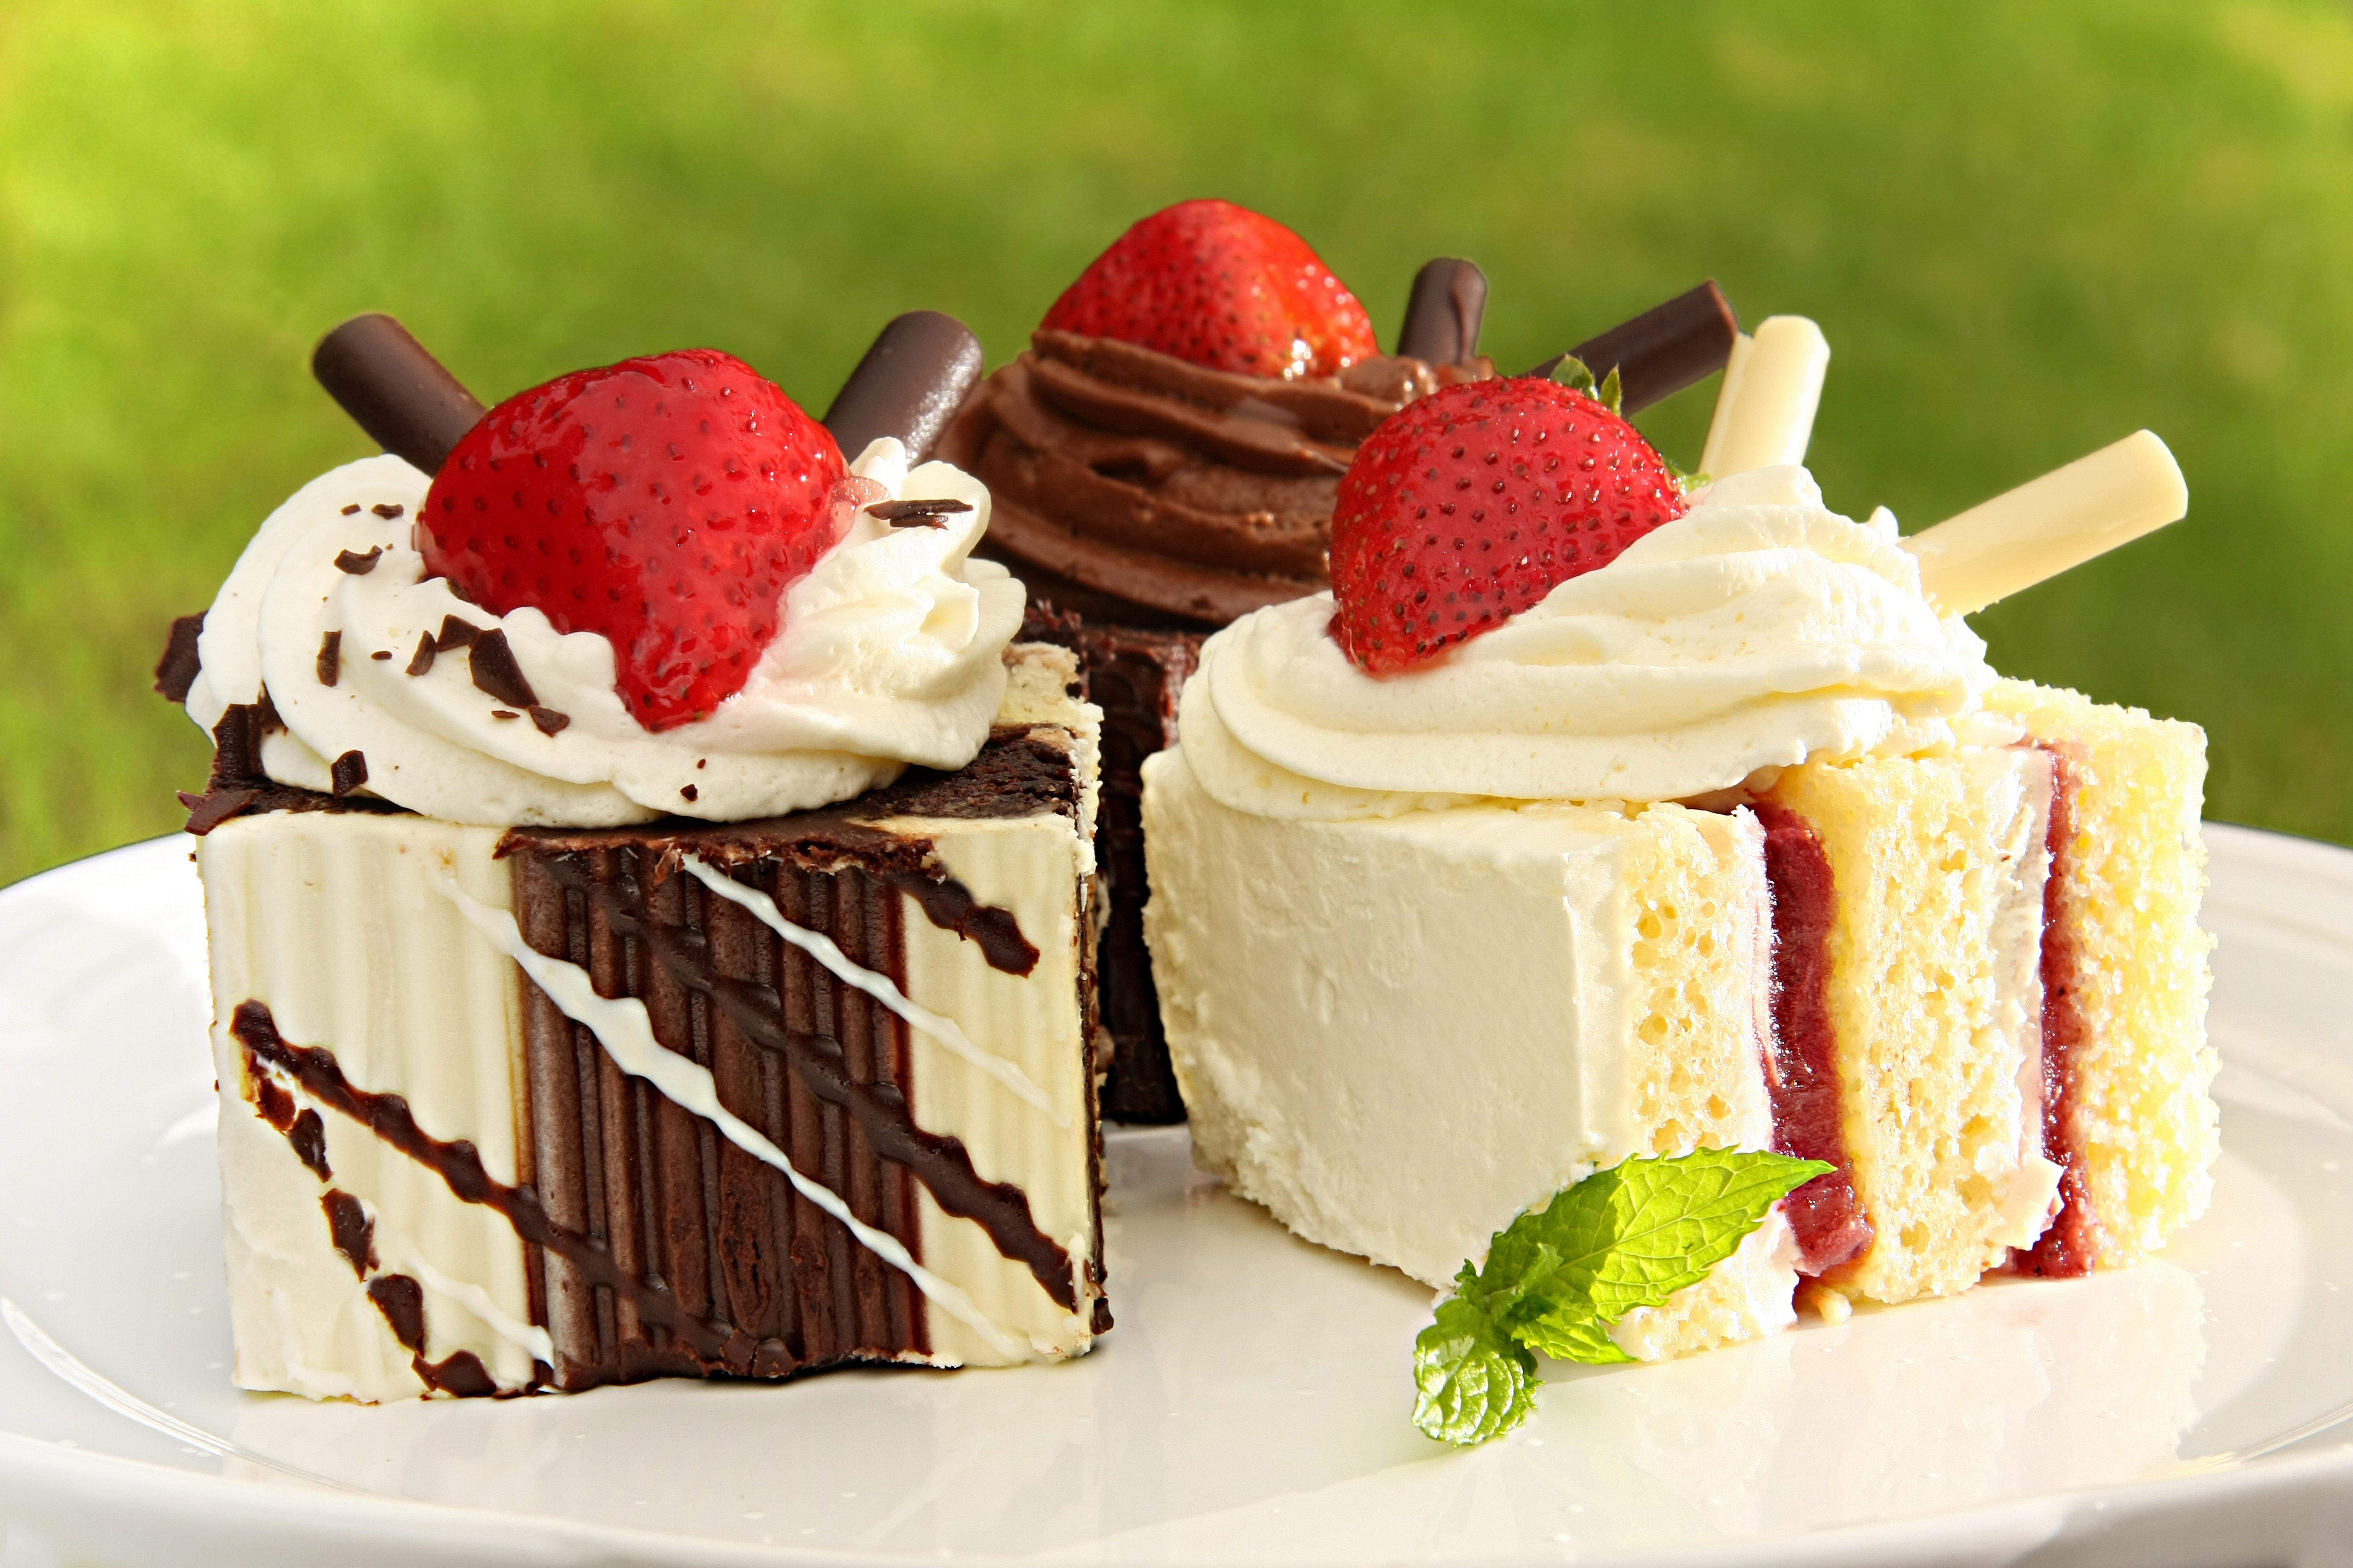 Rich Cakes in Pashan,Pune - Best Cake Delivery Services in Pune - Justdial